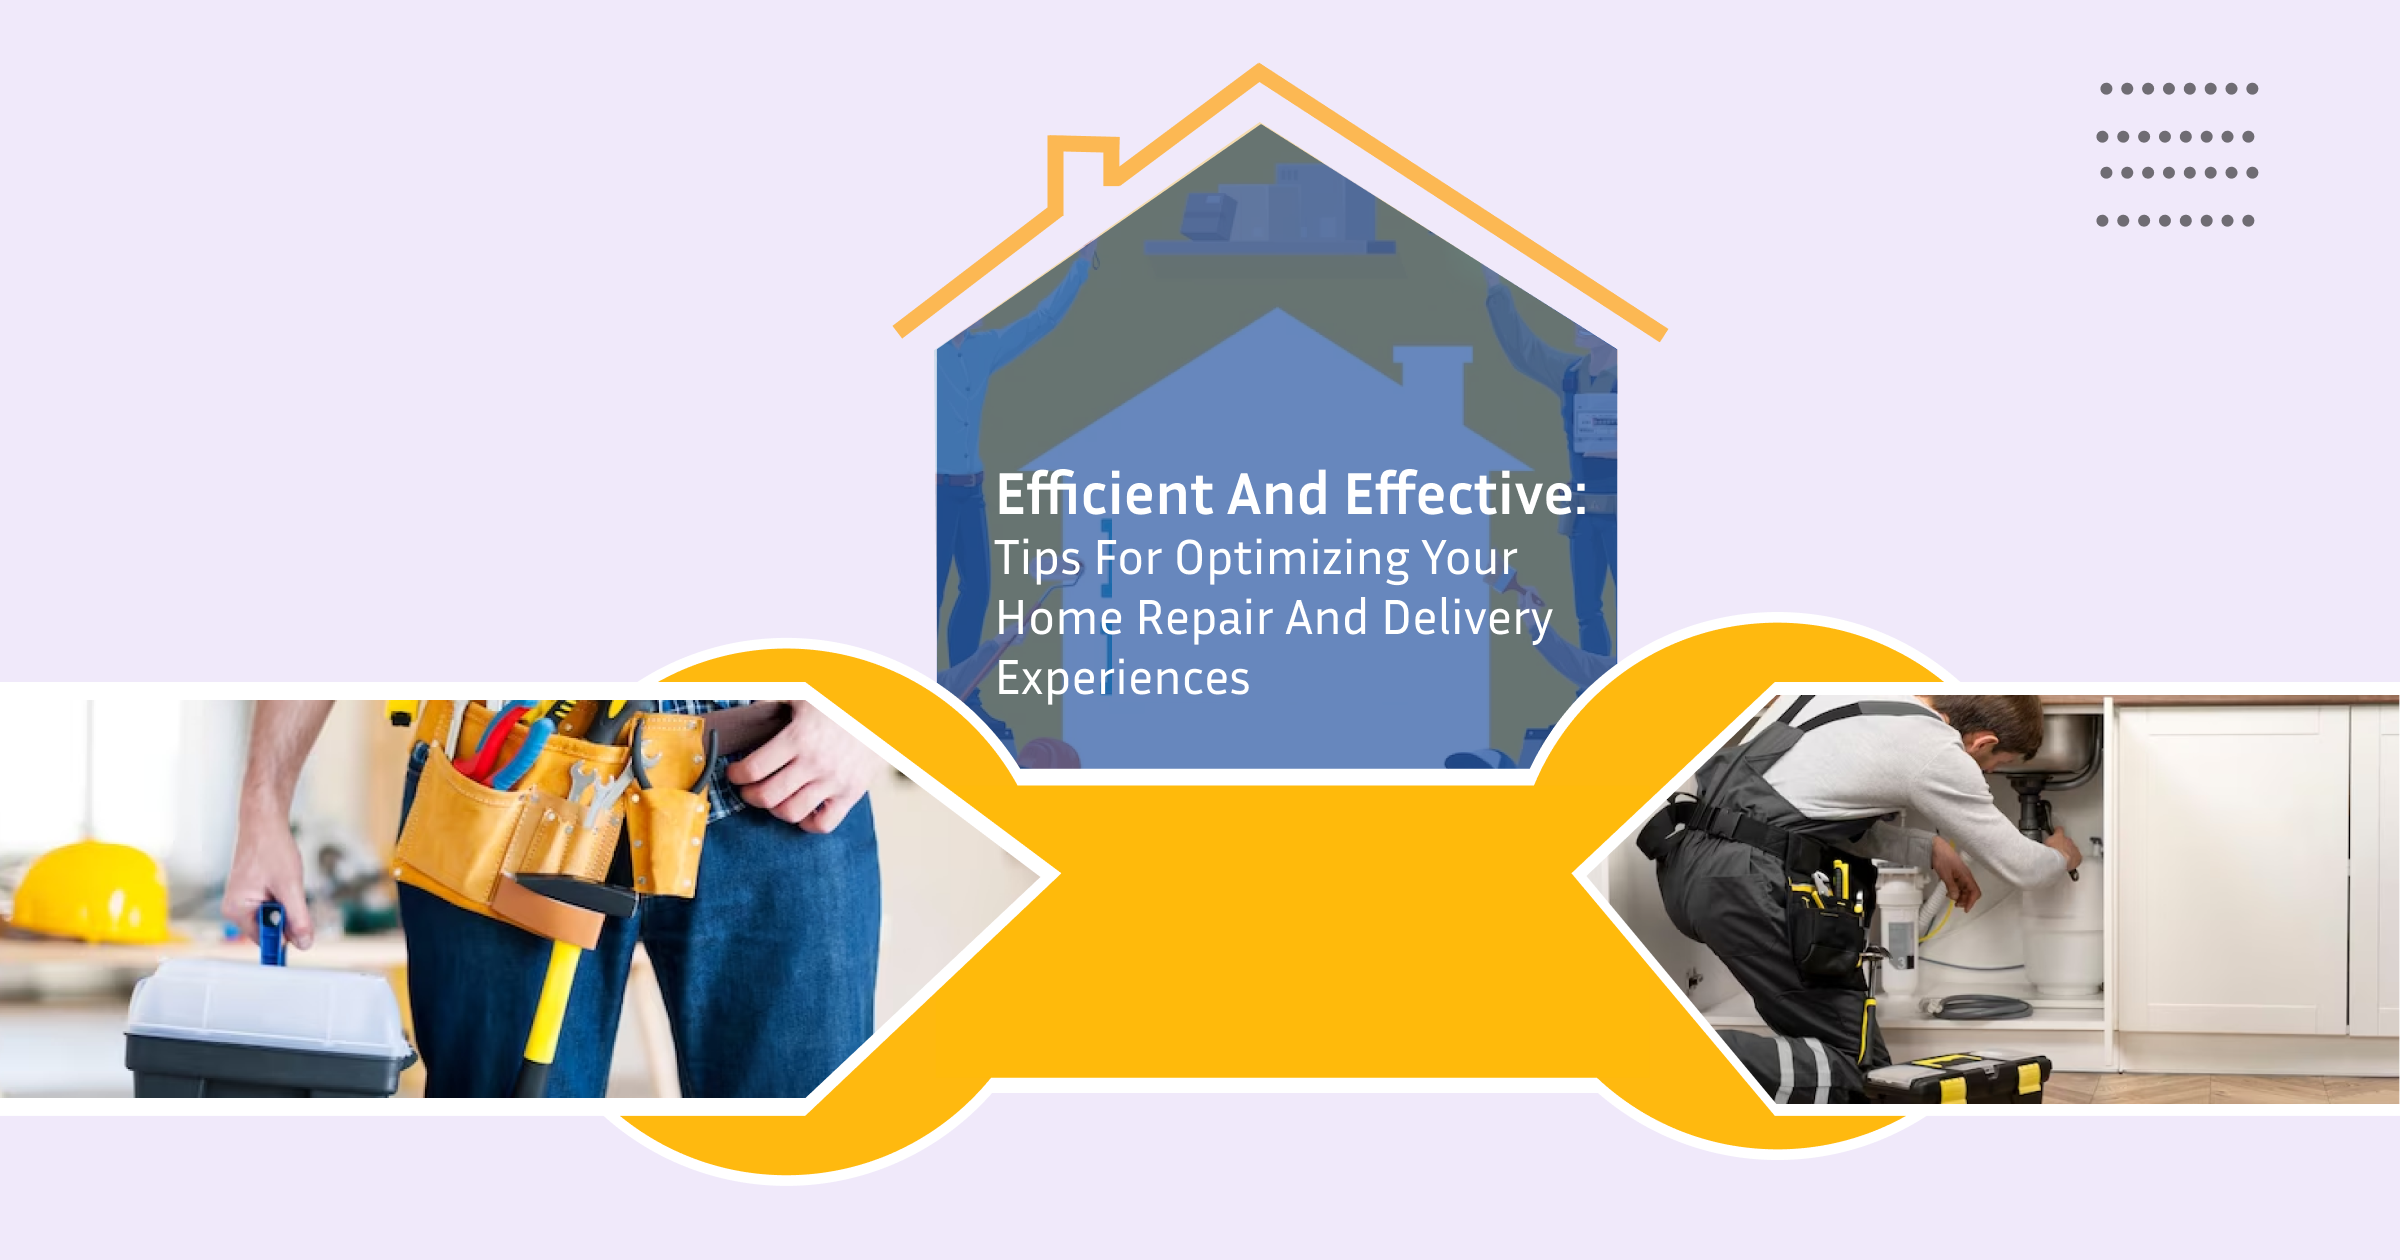 Efficient And Effective: Tips For Optimizing Your Home Repair And Delivery Experiences